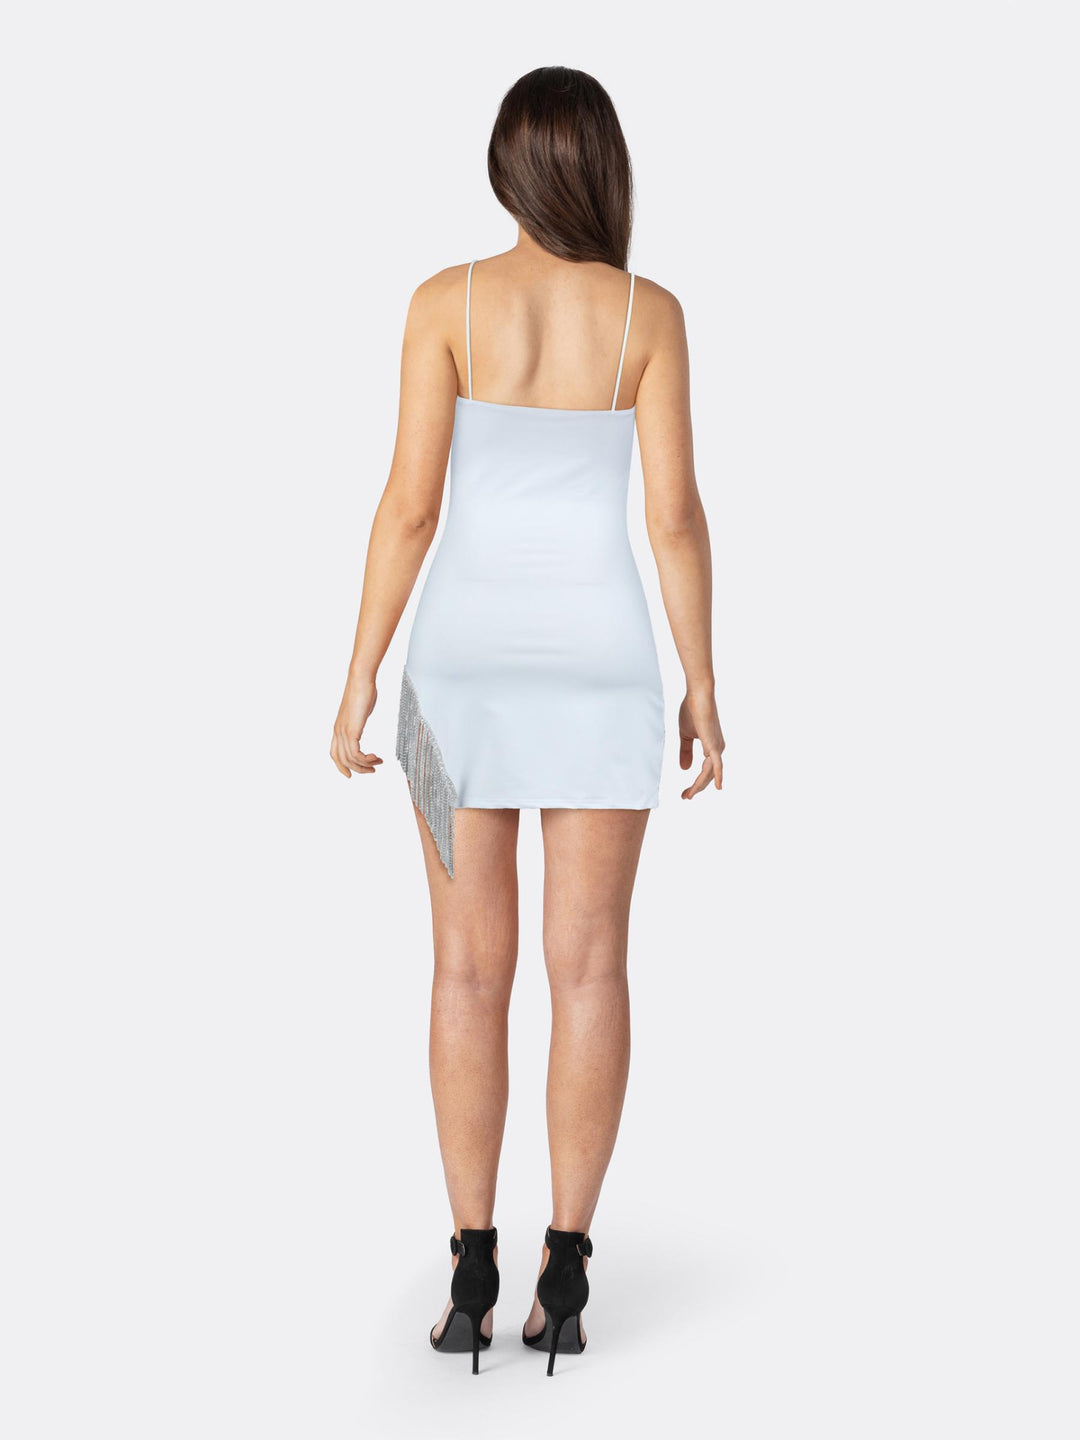 Bodycon Mini Dress with Bejeweled Fringing and Thin Straps White Back | Jolovies